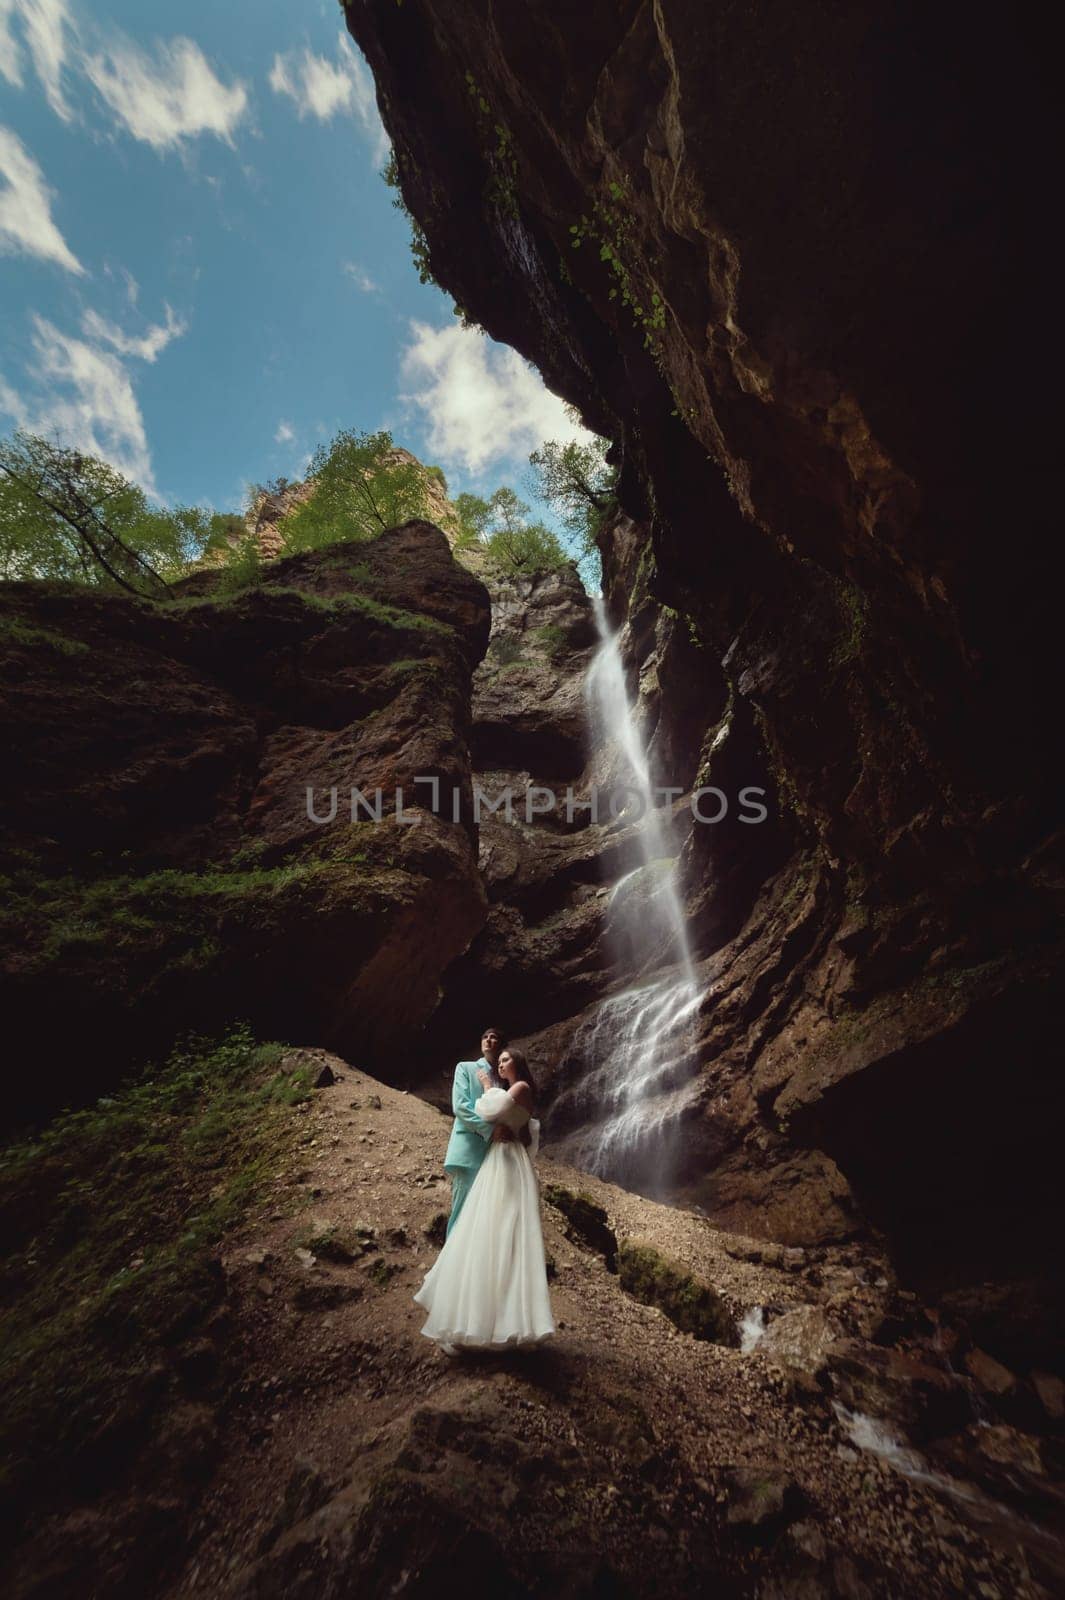 A young man and his wife are standing in an embrace in a canyon against the backdrop of a high waterfall. Newlyweds wedding couple in the mountains by yanik88